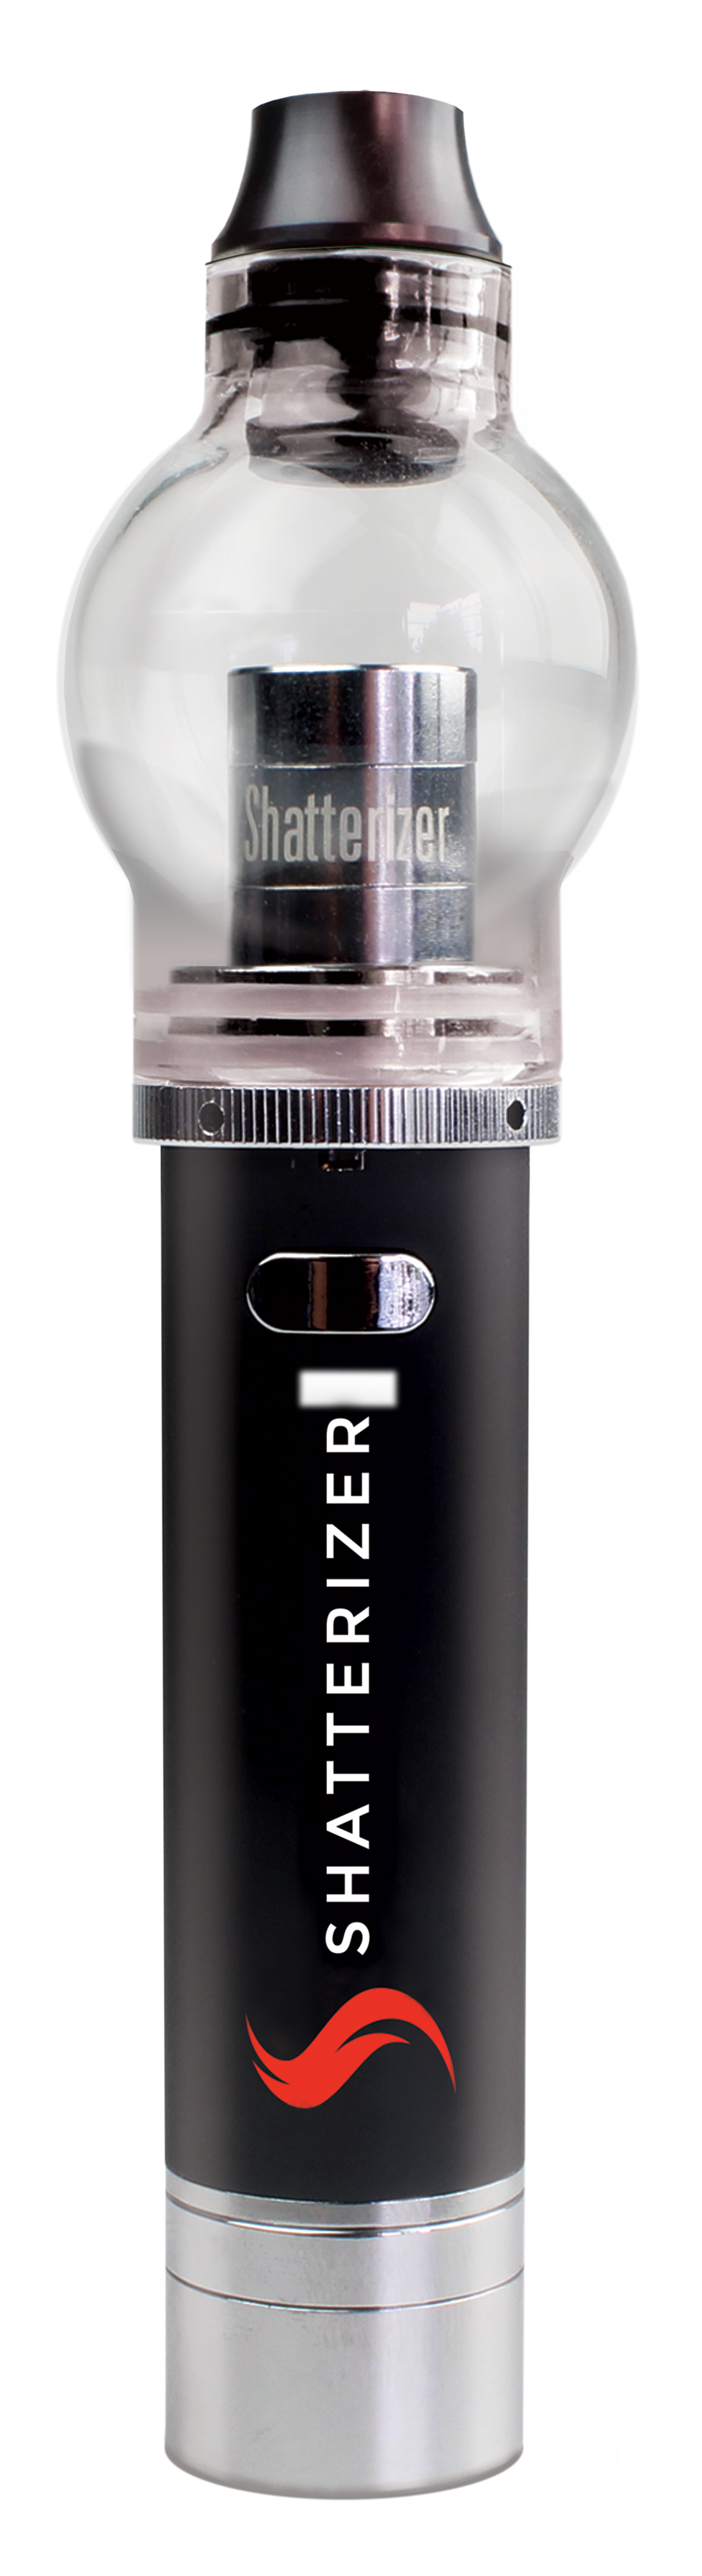 Shatterizer Replacement Glass and Mouthpiece